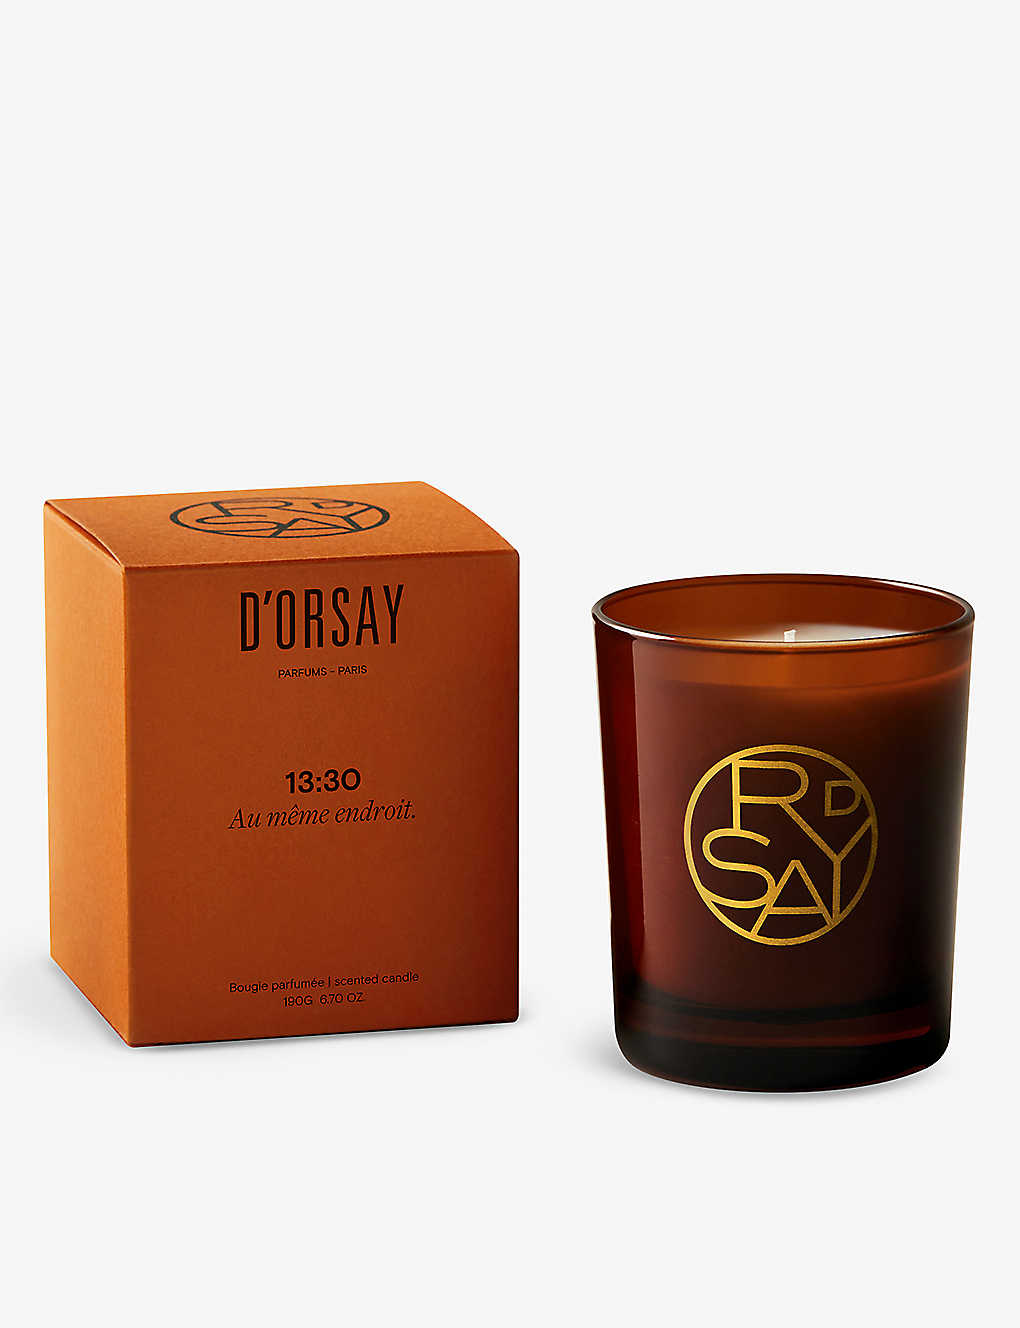 D'orsay 13:30 Scented Candle 190g